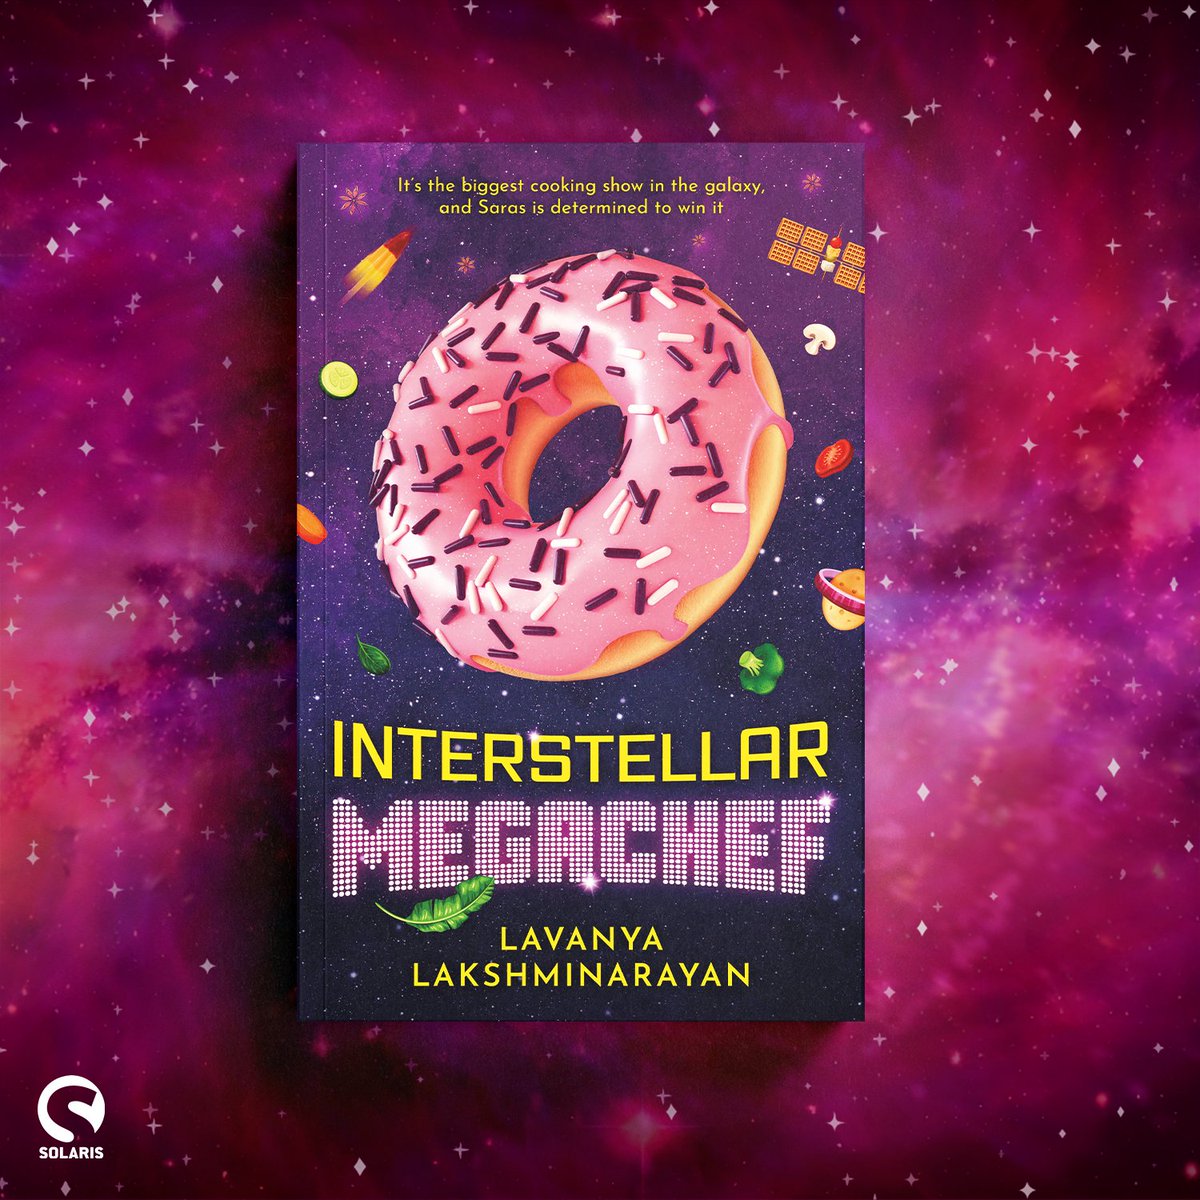 ICYMI 🚨COVER REVEAL🚨 Feast your eyes upon the deliciously delightful cover for INTERSTELLAR MEGACHEF by @lavanya_ln! Cover art by our very own Sam Gretton. Think The Great British Bake Off - In Space! Out November 2024. Preorder now: geni.us/Megachef